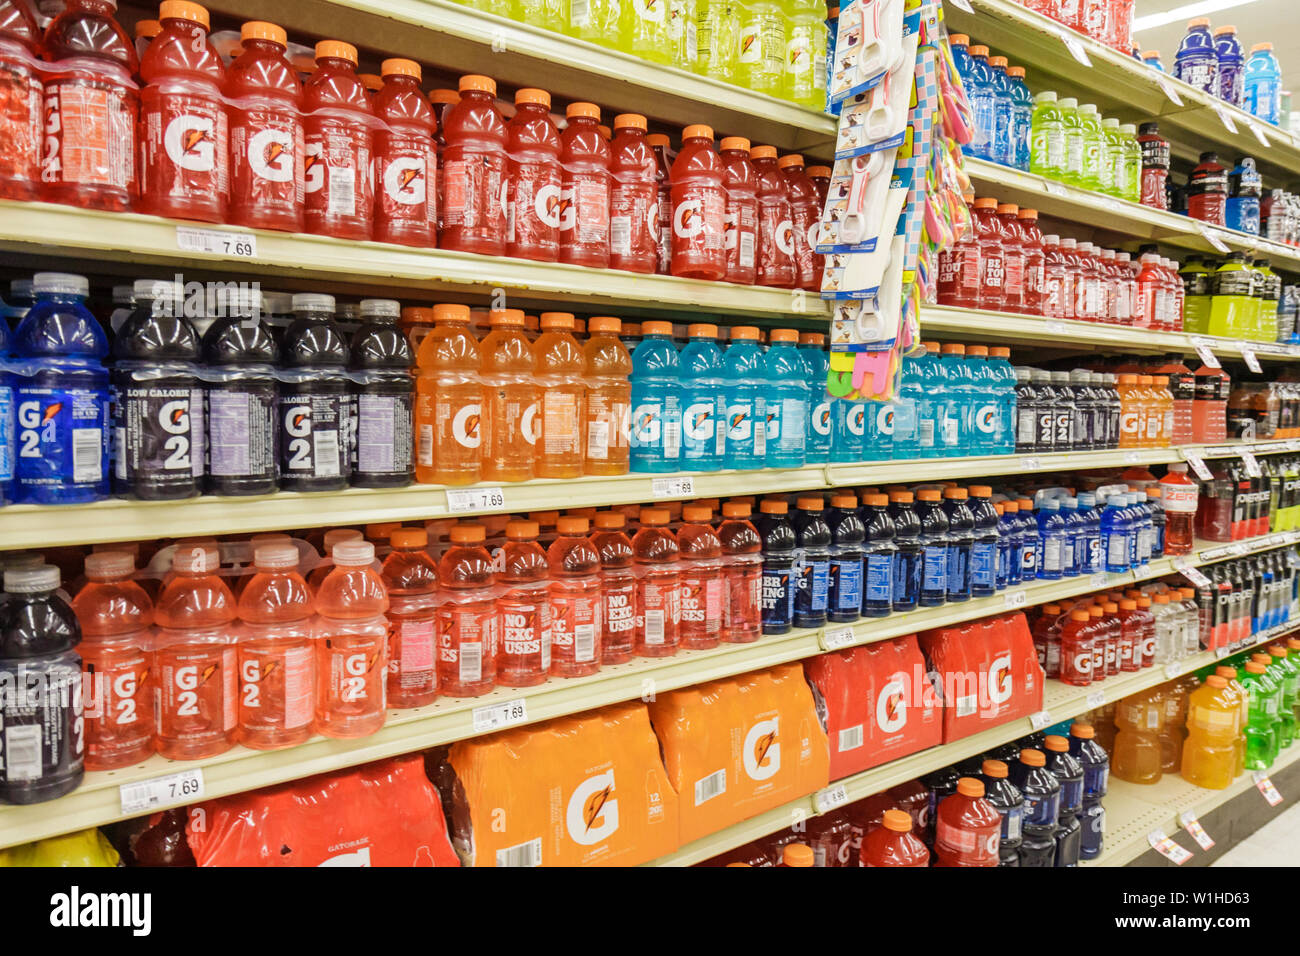 Fort Ft. Lauderdale Florida,Winn grocery store,supermarket,packaging,product product products display sale,competition,Gatorade,G2,sports drink drinks Stock Photo